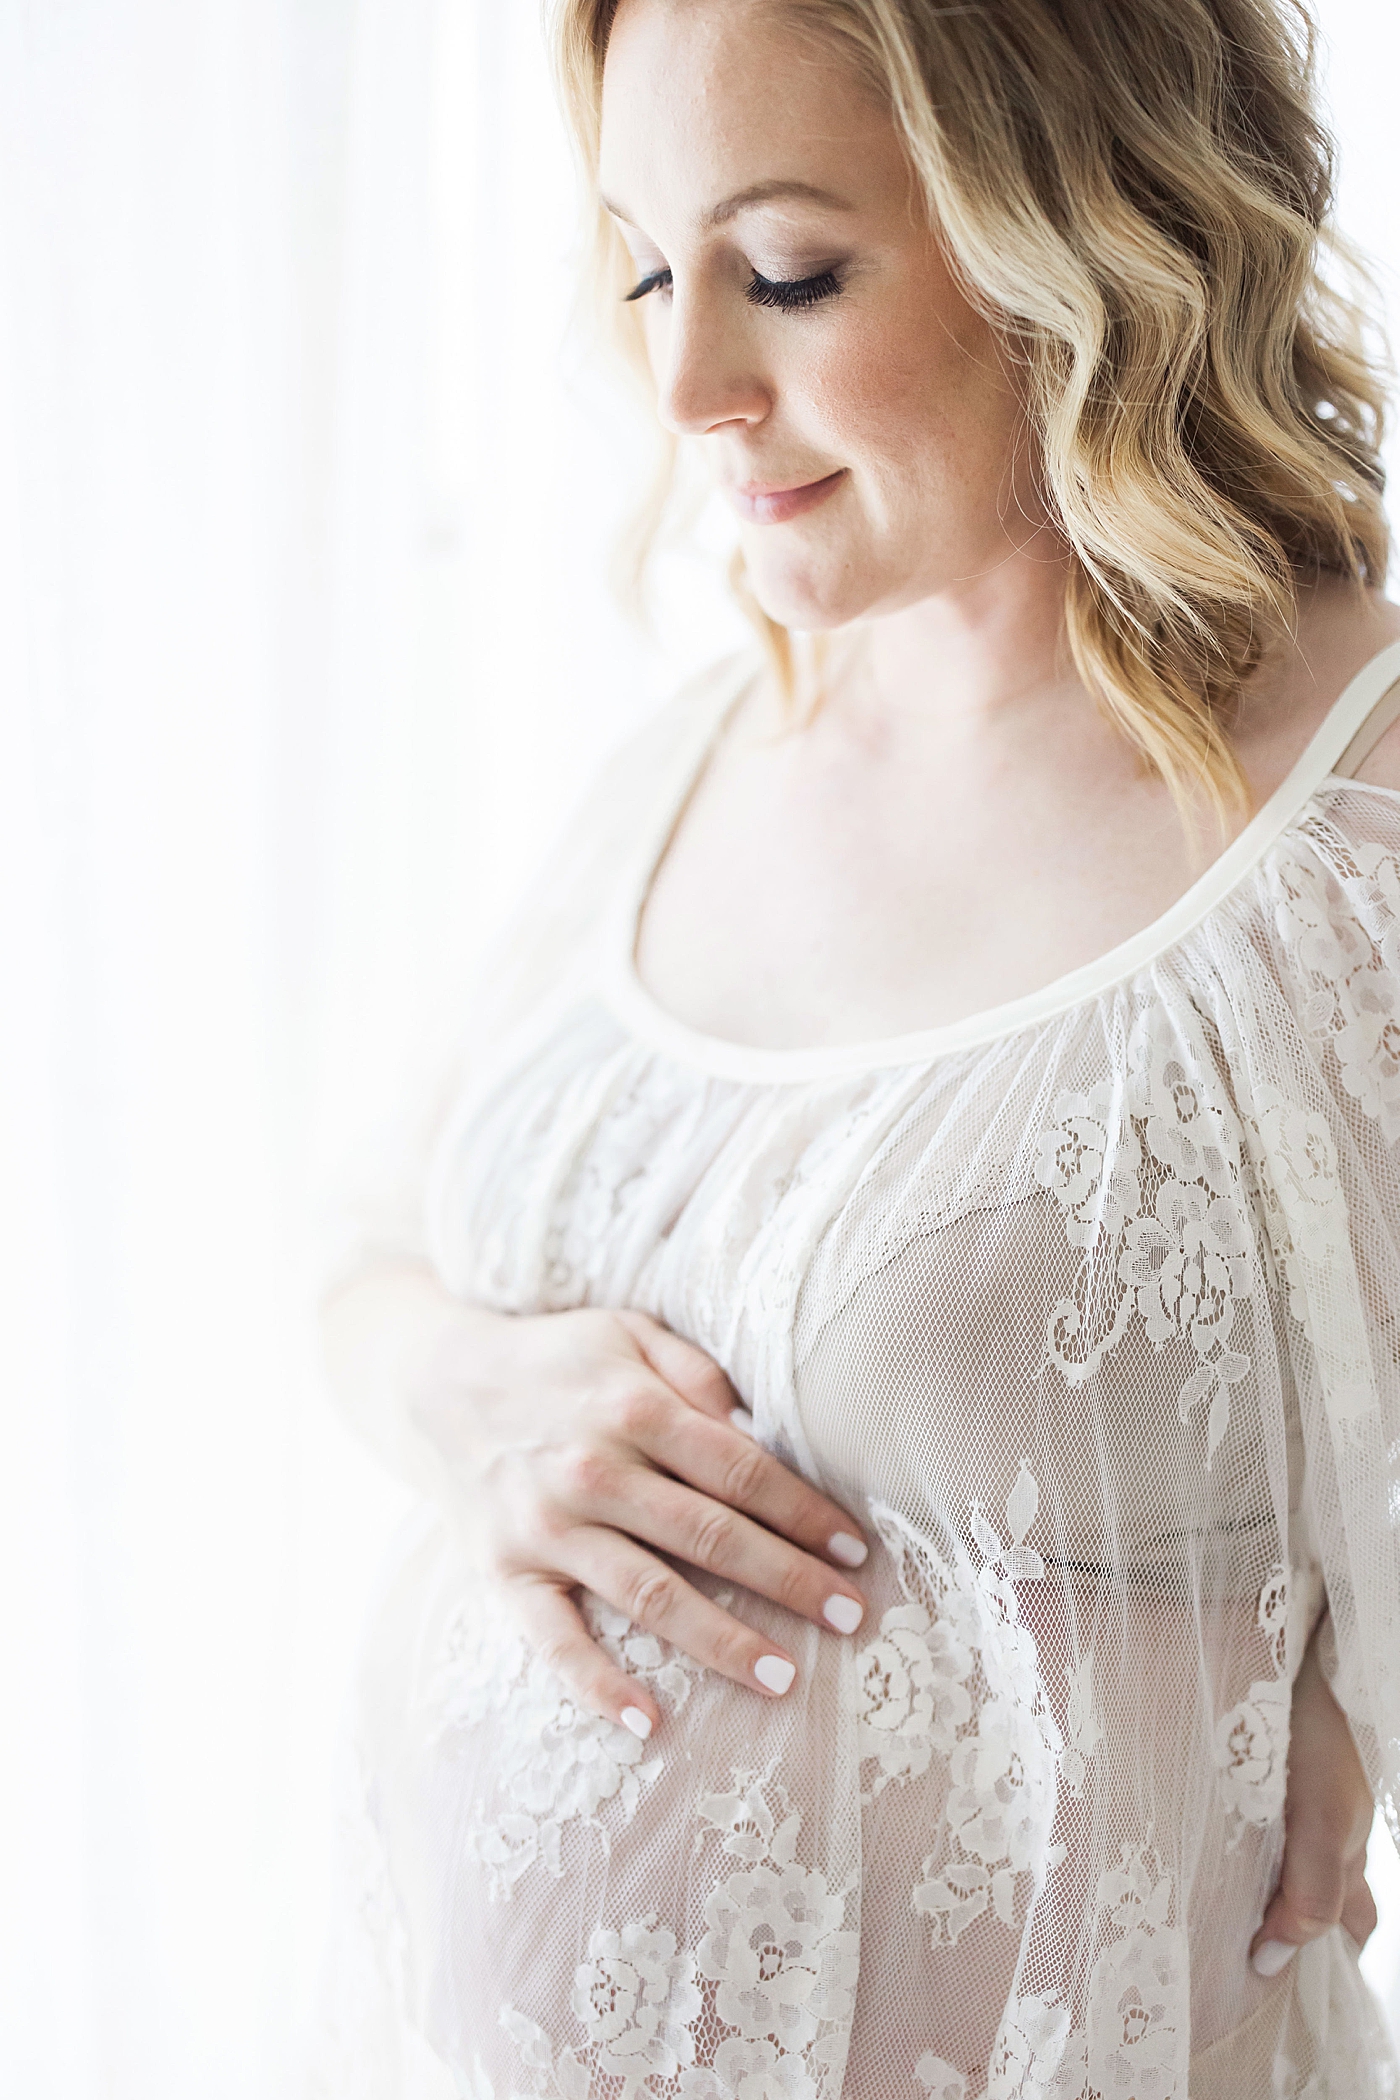 Intimate maternity photos in studio in Houston. Photo by Fresh Light Photography.